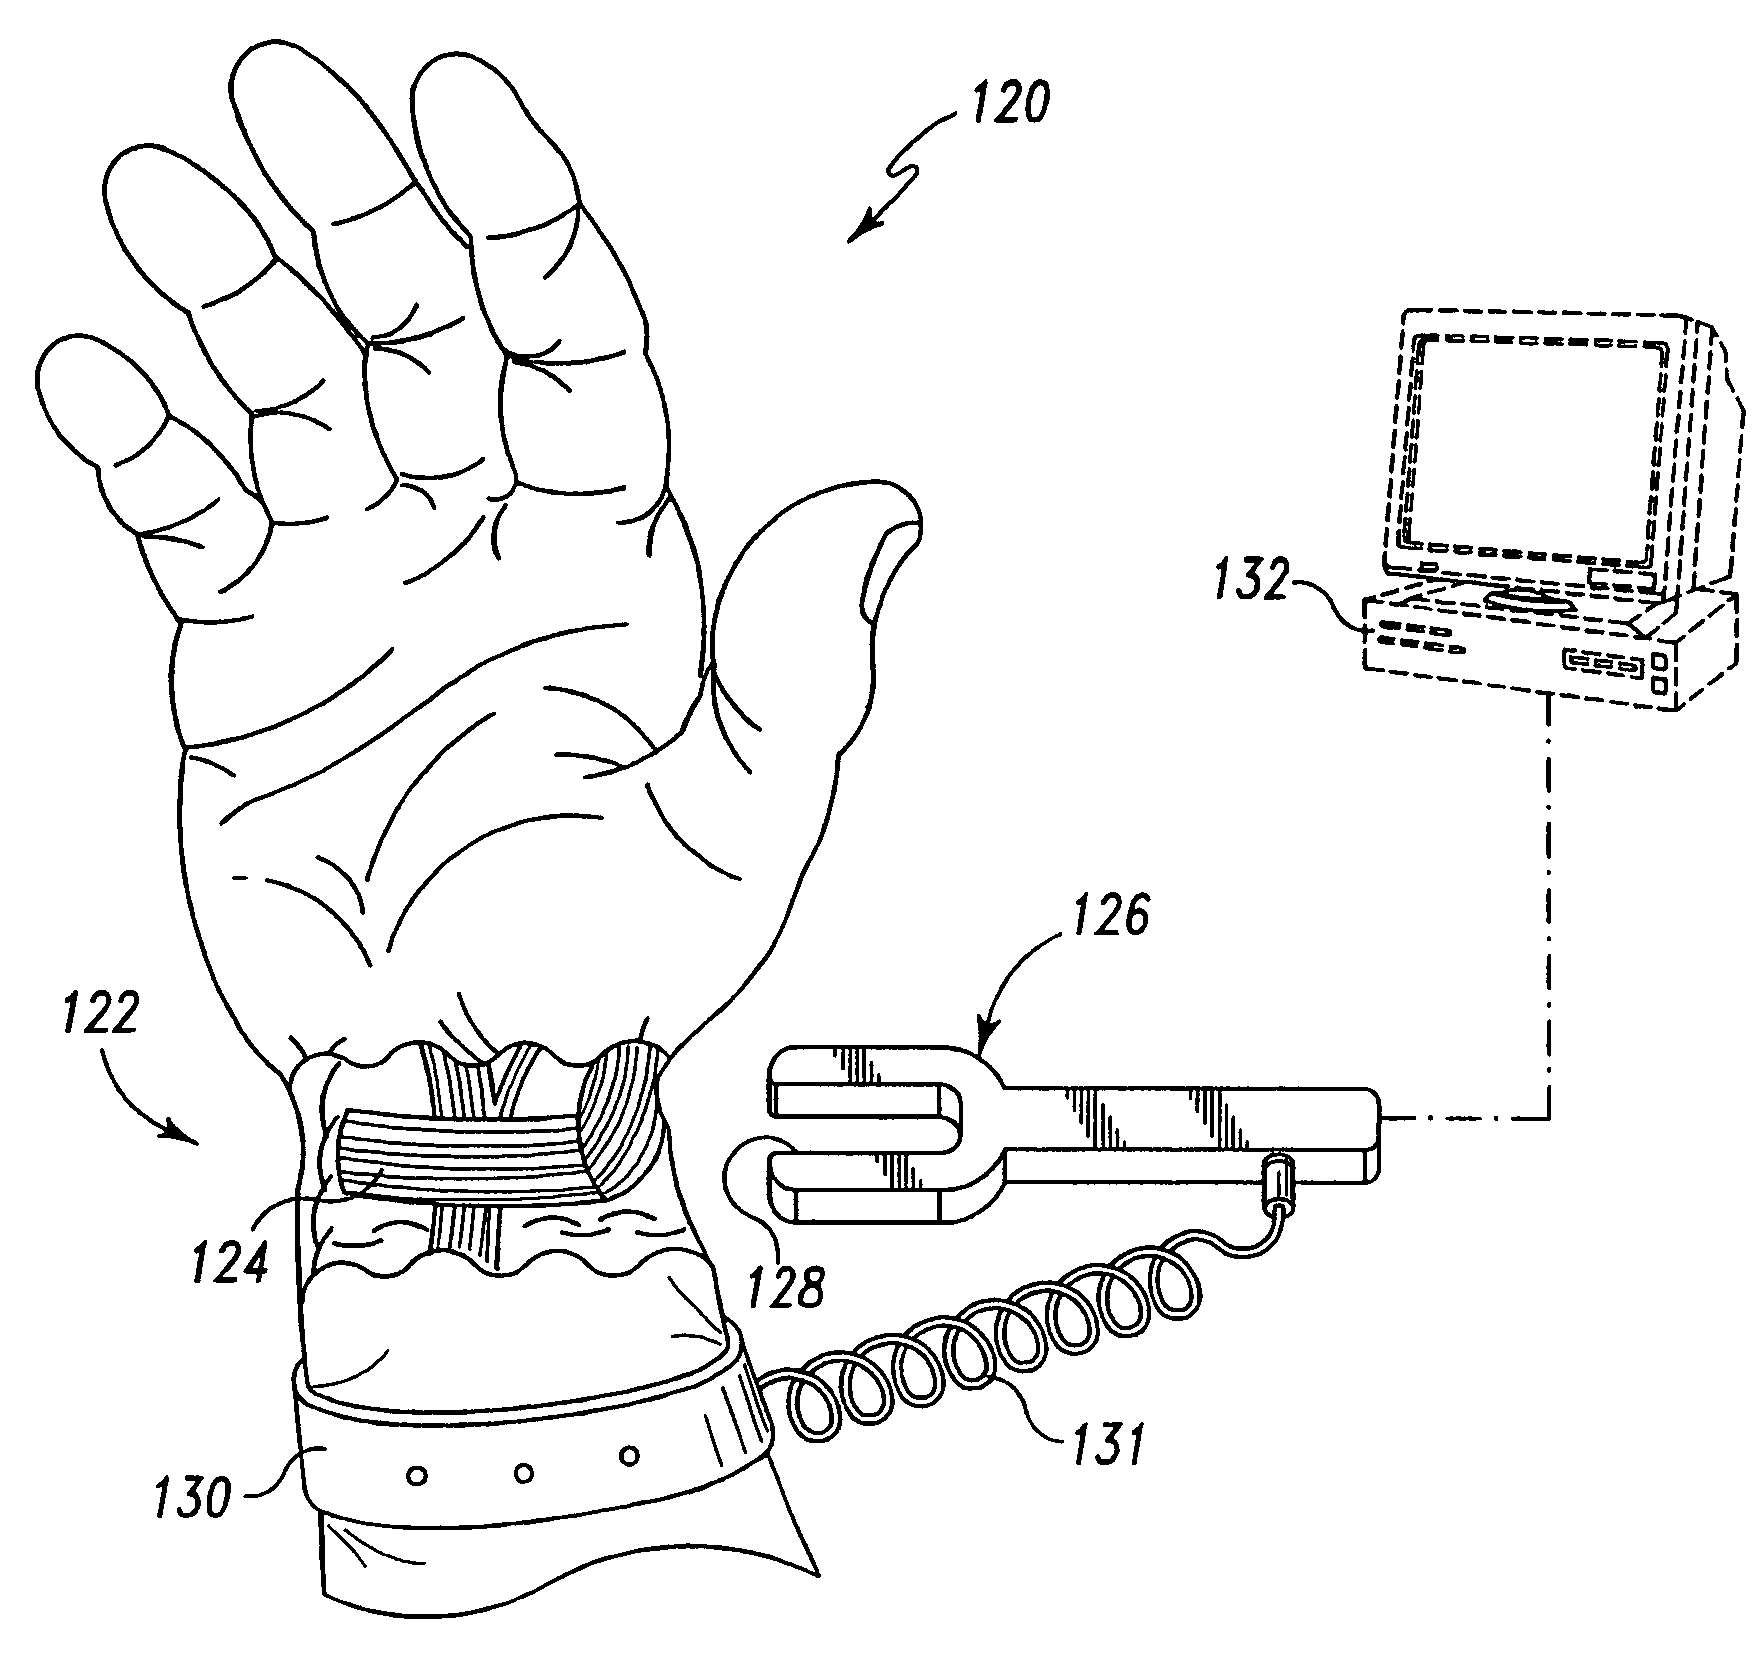 Surgical scalpel and system particularly for use in a transverse carpal ligament surgical procedure